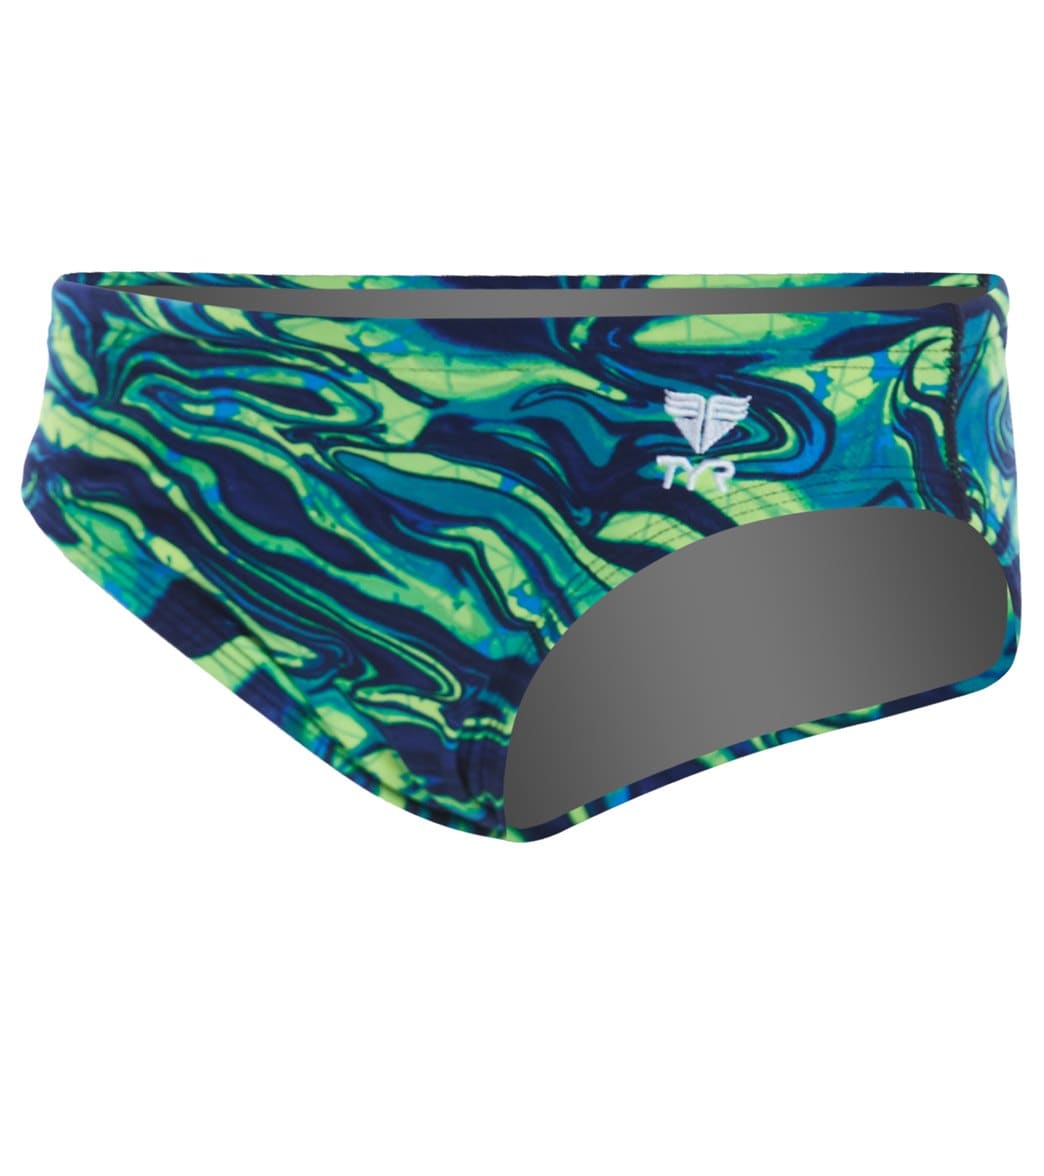 TYR Miramar Allover Racer Brief Swimsuit - Blue/Green 24 Polyester/Spandex - Swimoutlet.com